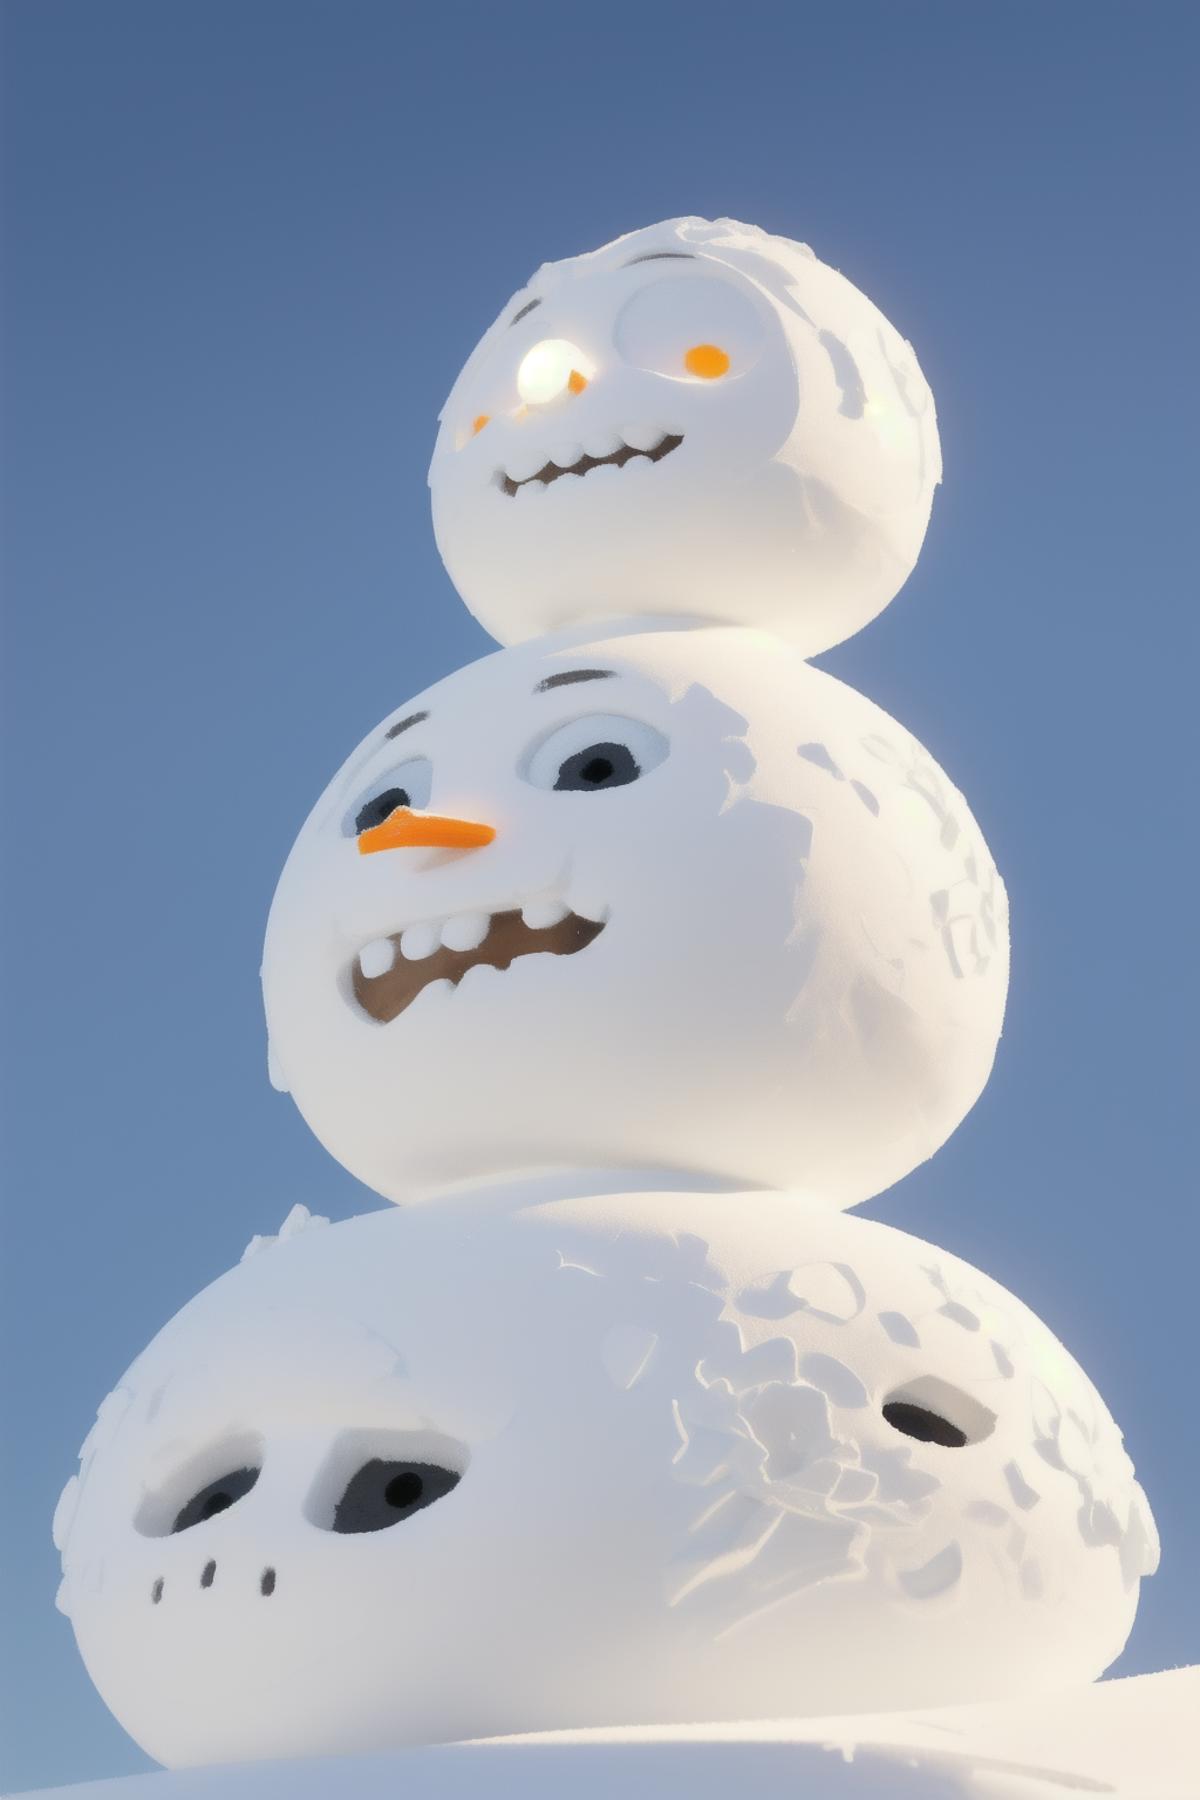 Snowman Style image by CHINGEL